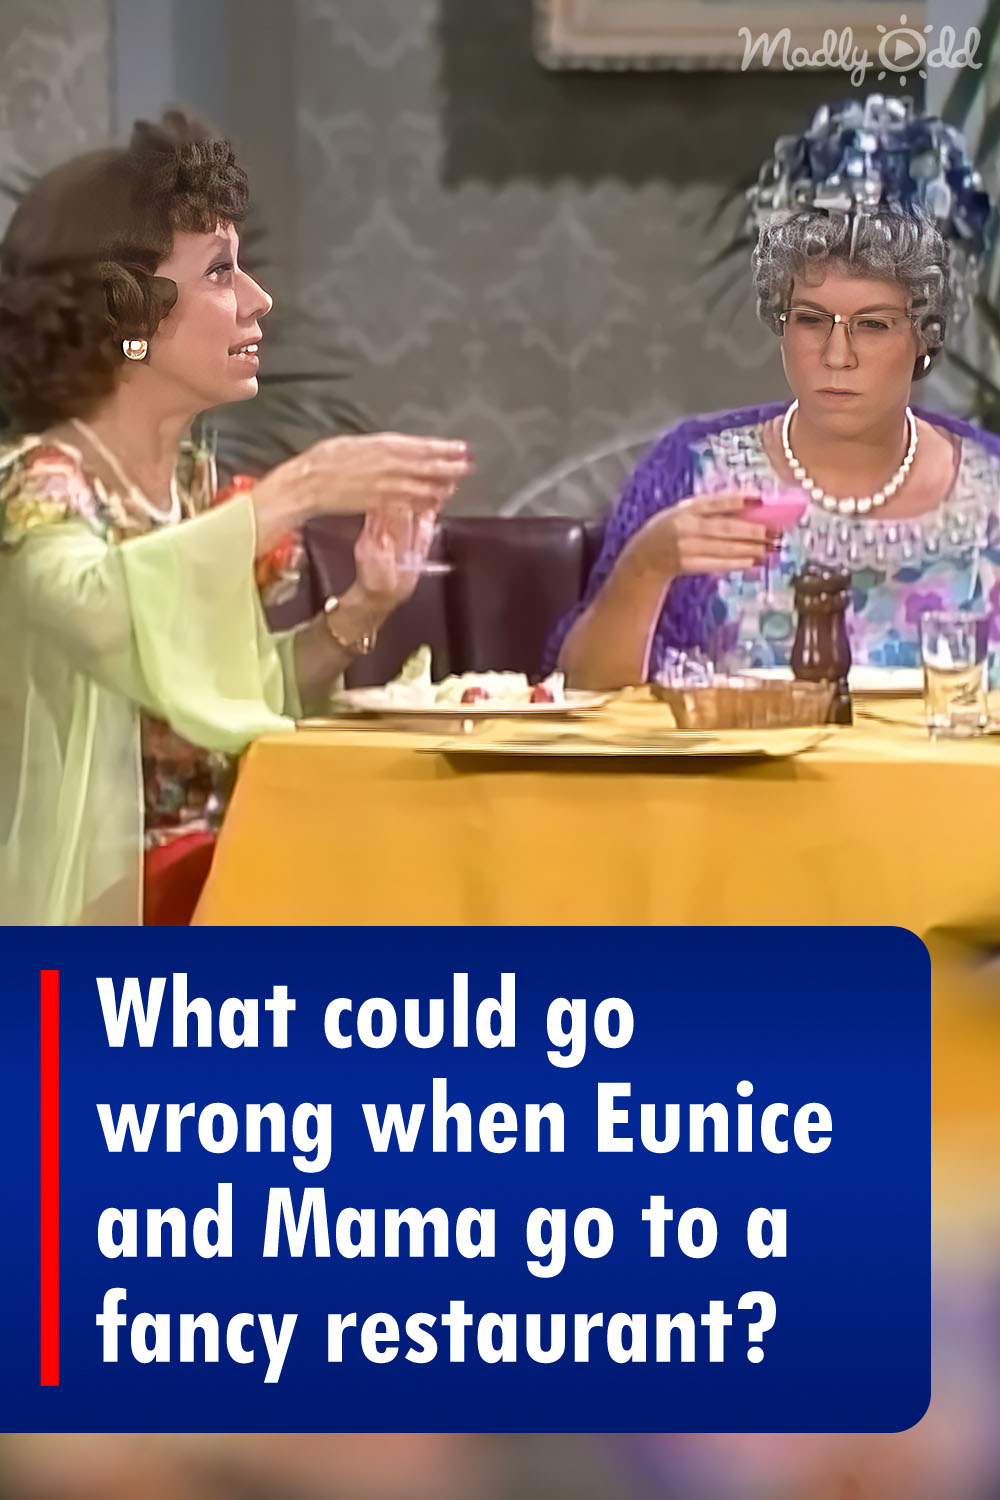 What could go wrong when Eunice and Mama go to a fancy restaurant?